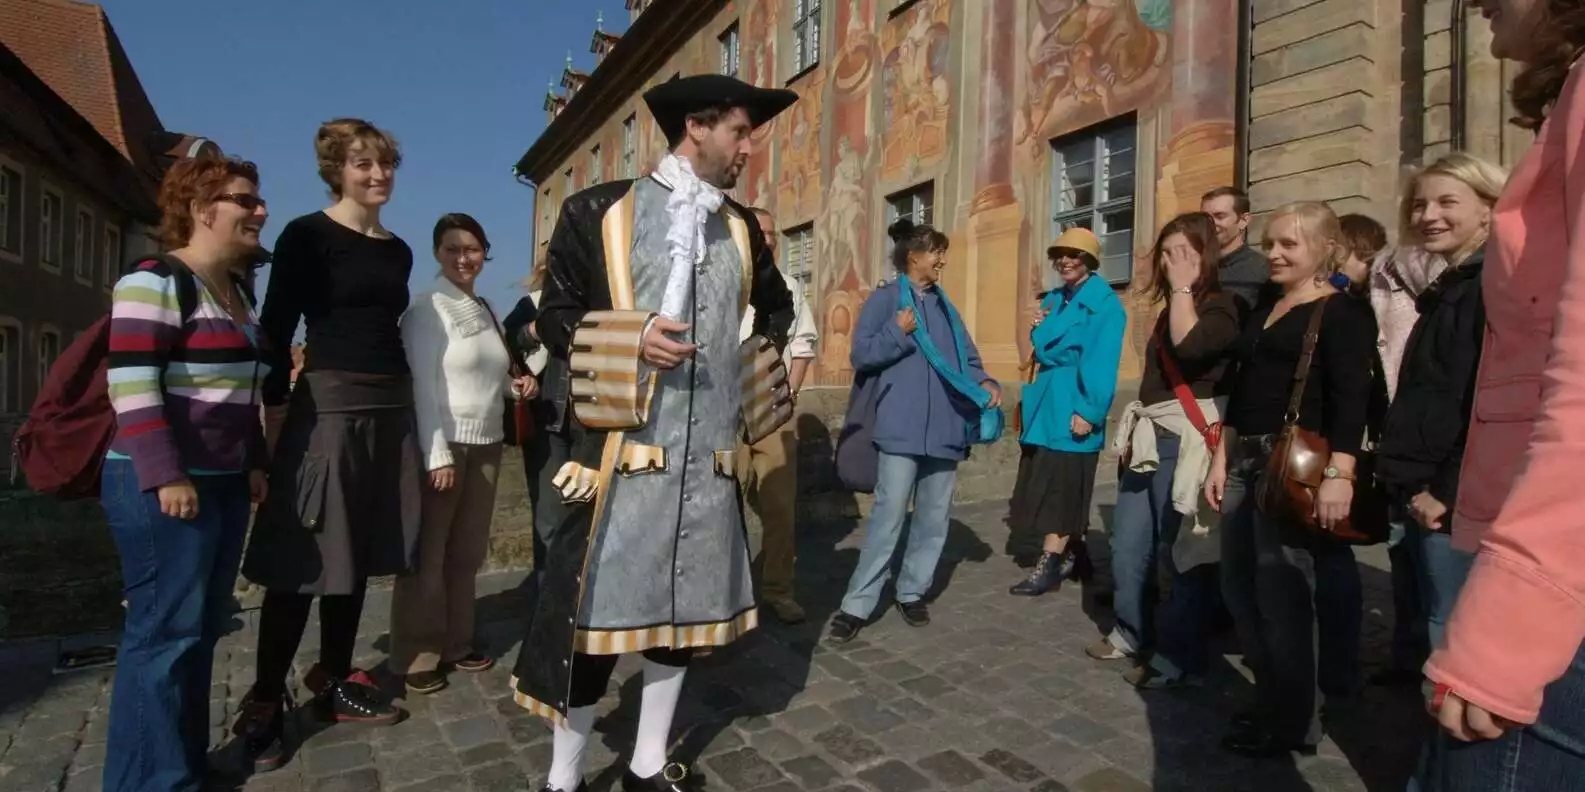 Bamberg: 1-Hour Theatrical Humor Tour with Costumed Guide | GetYourGuide